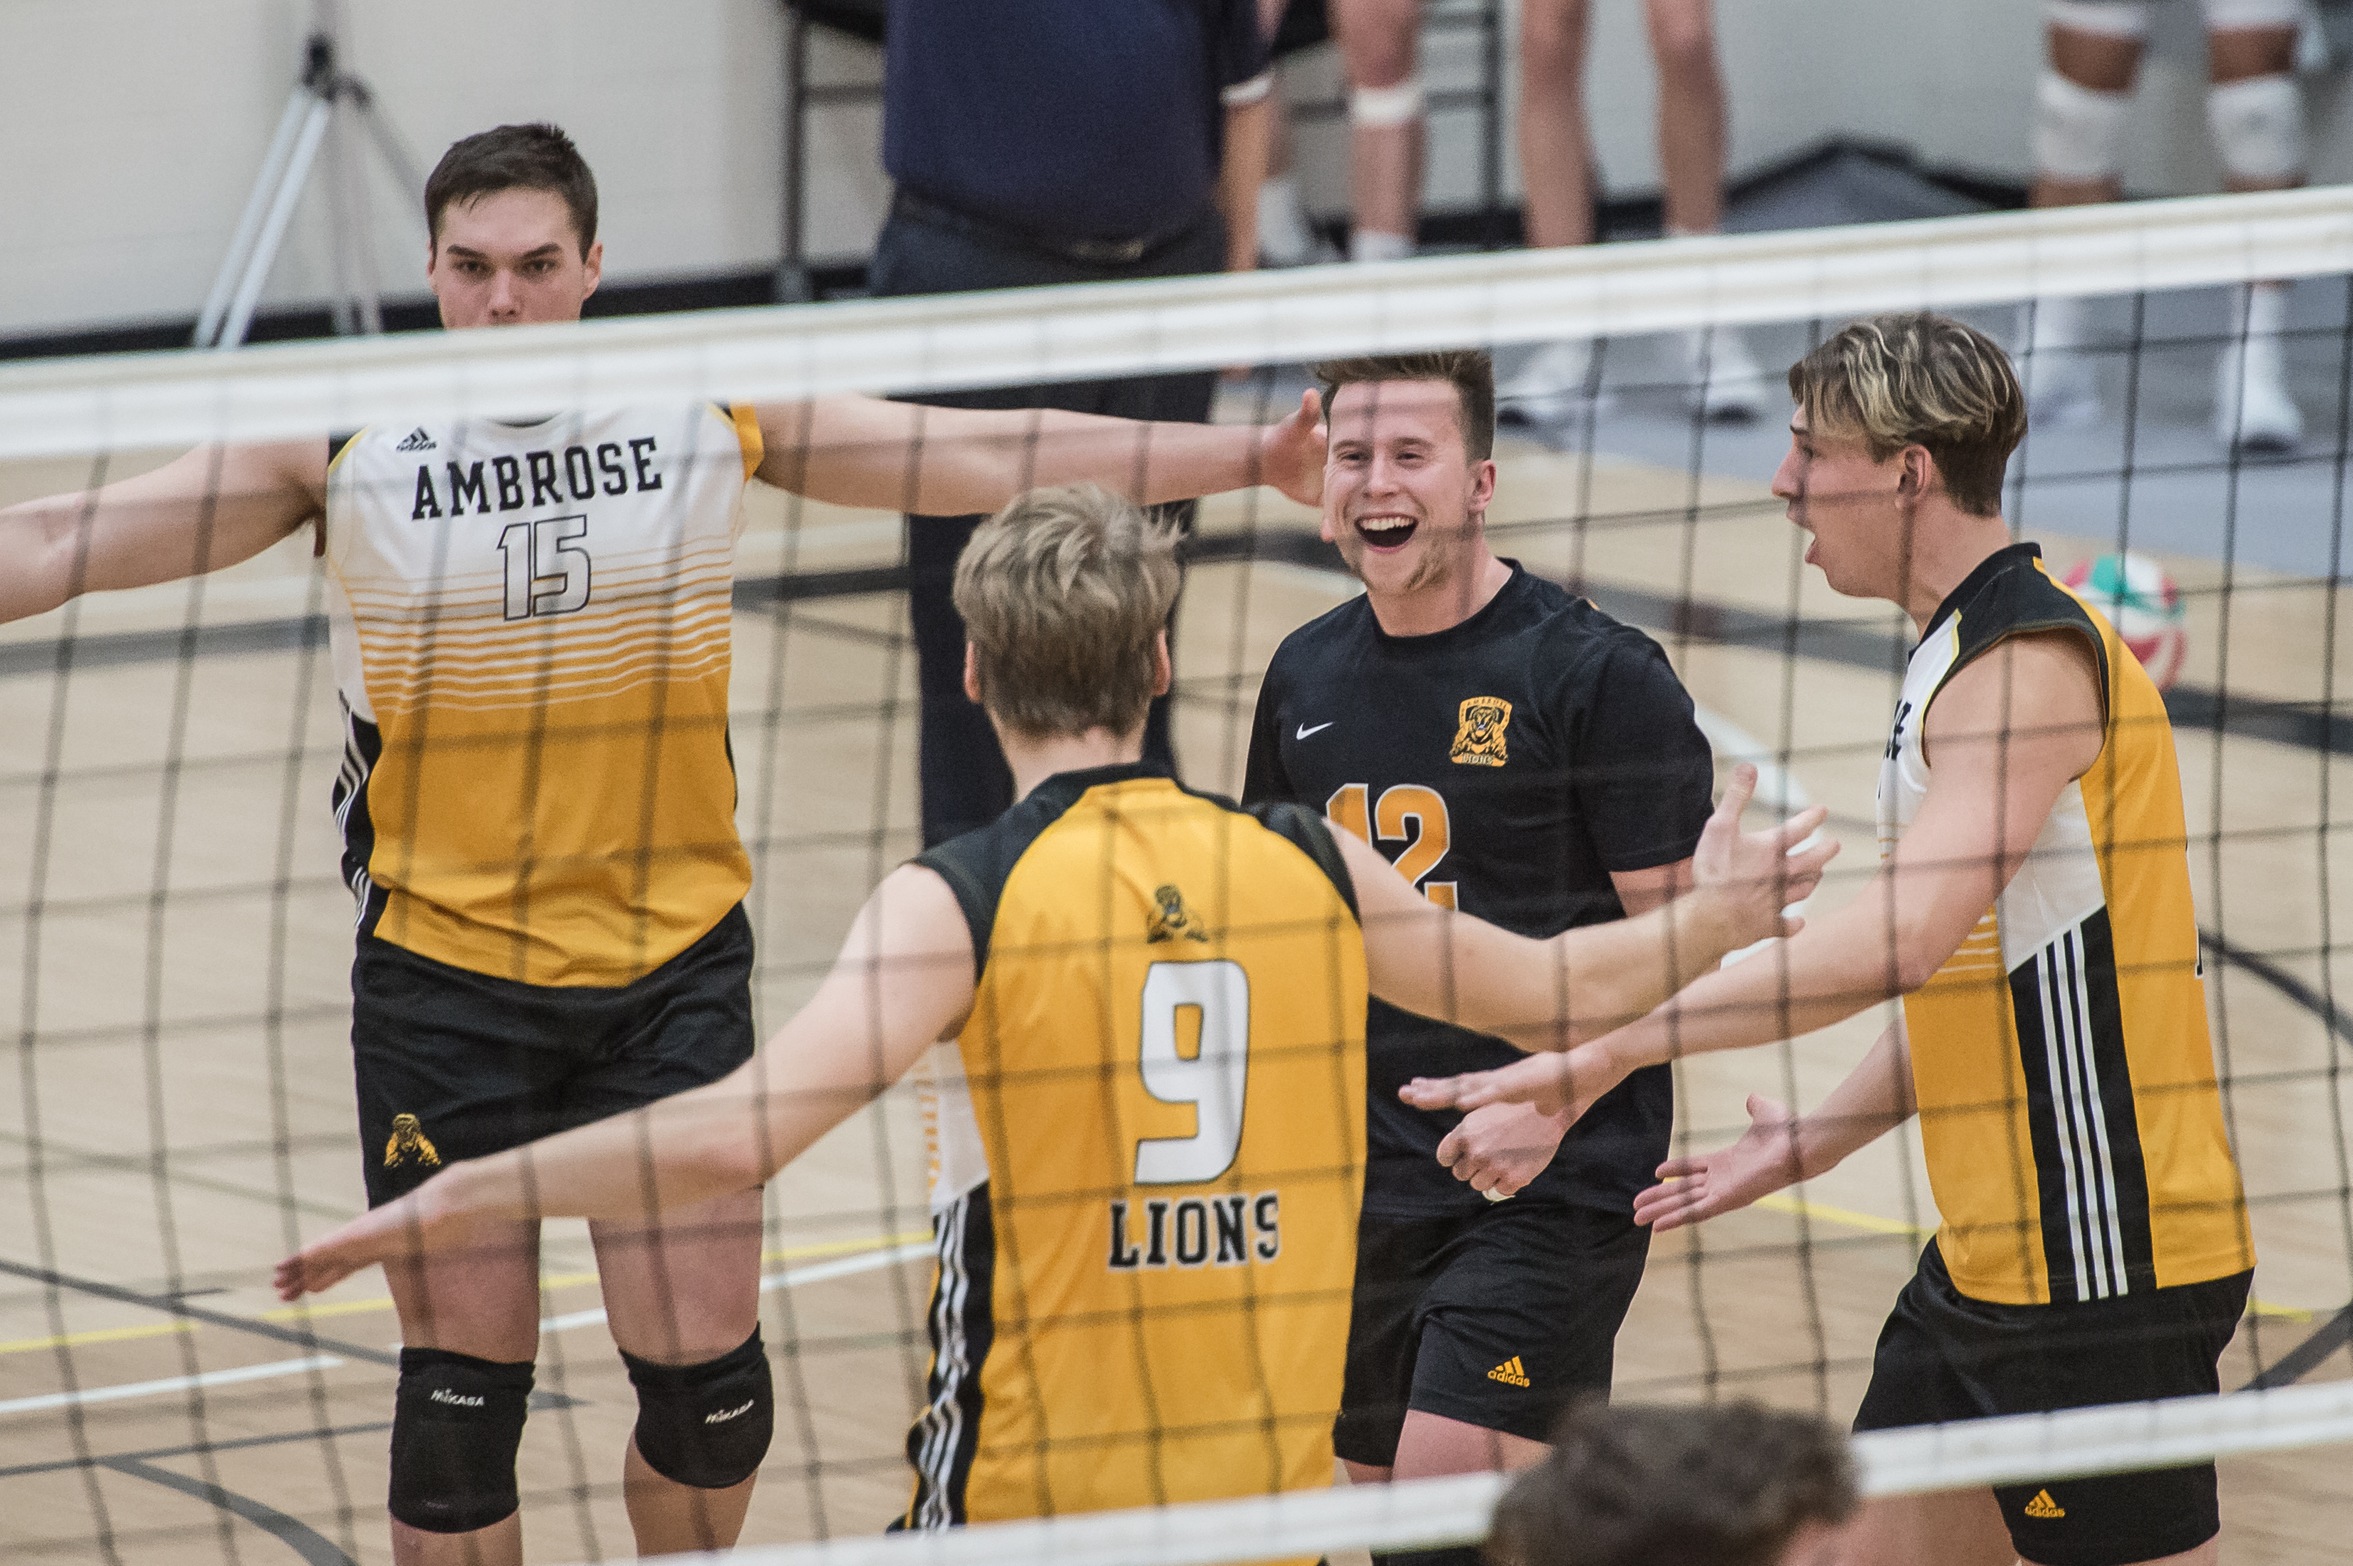 Ambrose Lions host Red Deer Polytechnic in search of their first win of 2022.